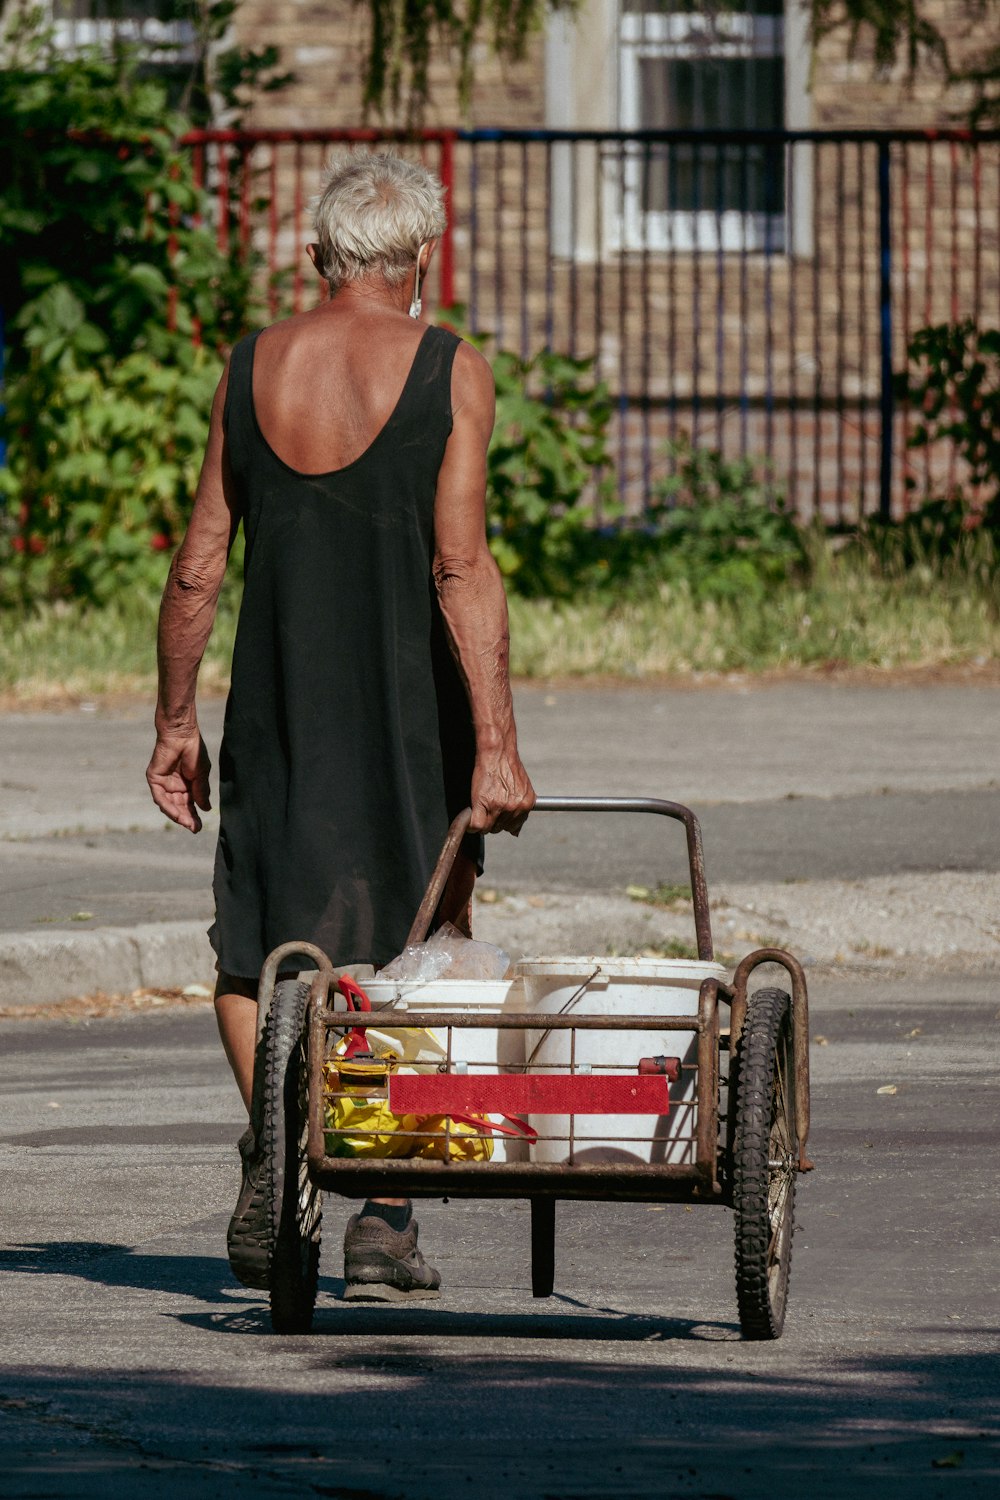 a person pushing a cart with a basket on it